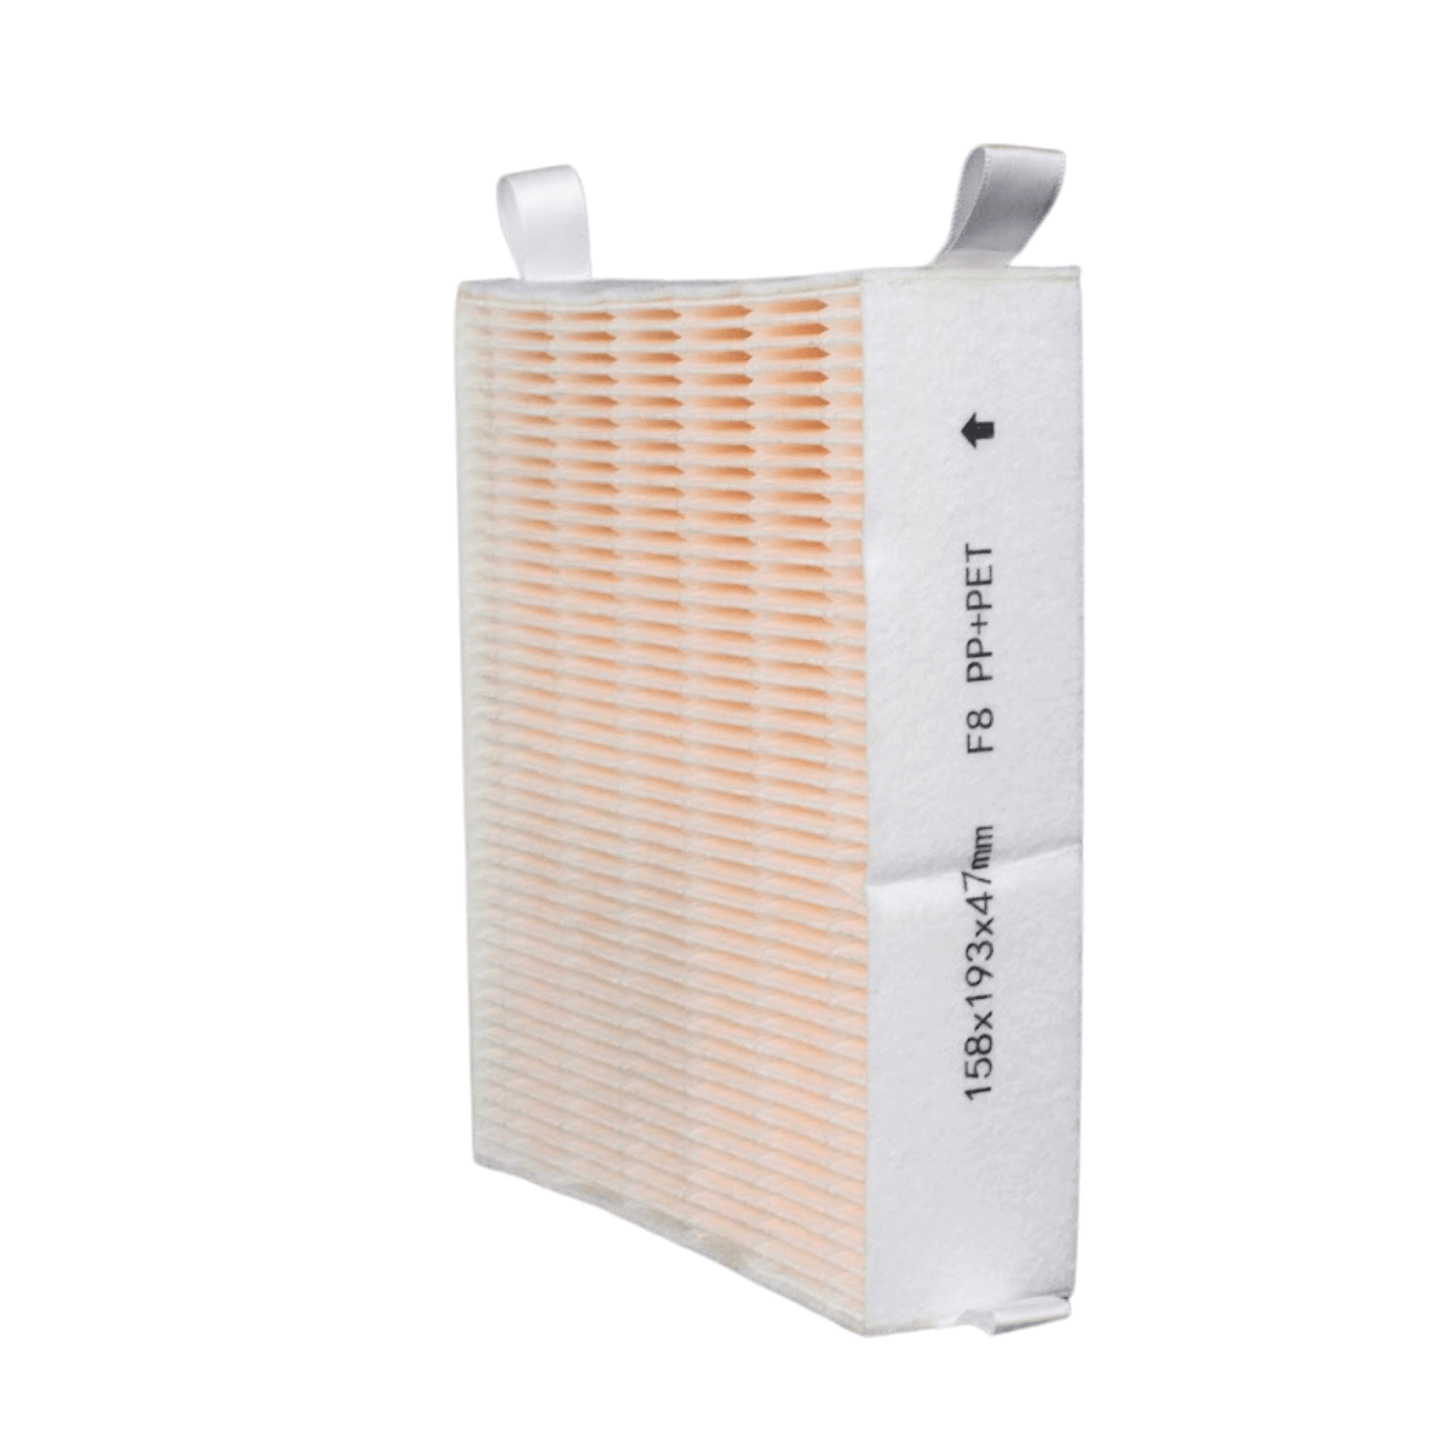 Vents Freshbox 100 Ductless Replacement filters